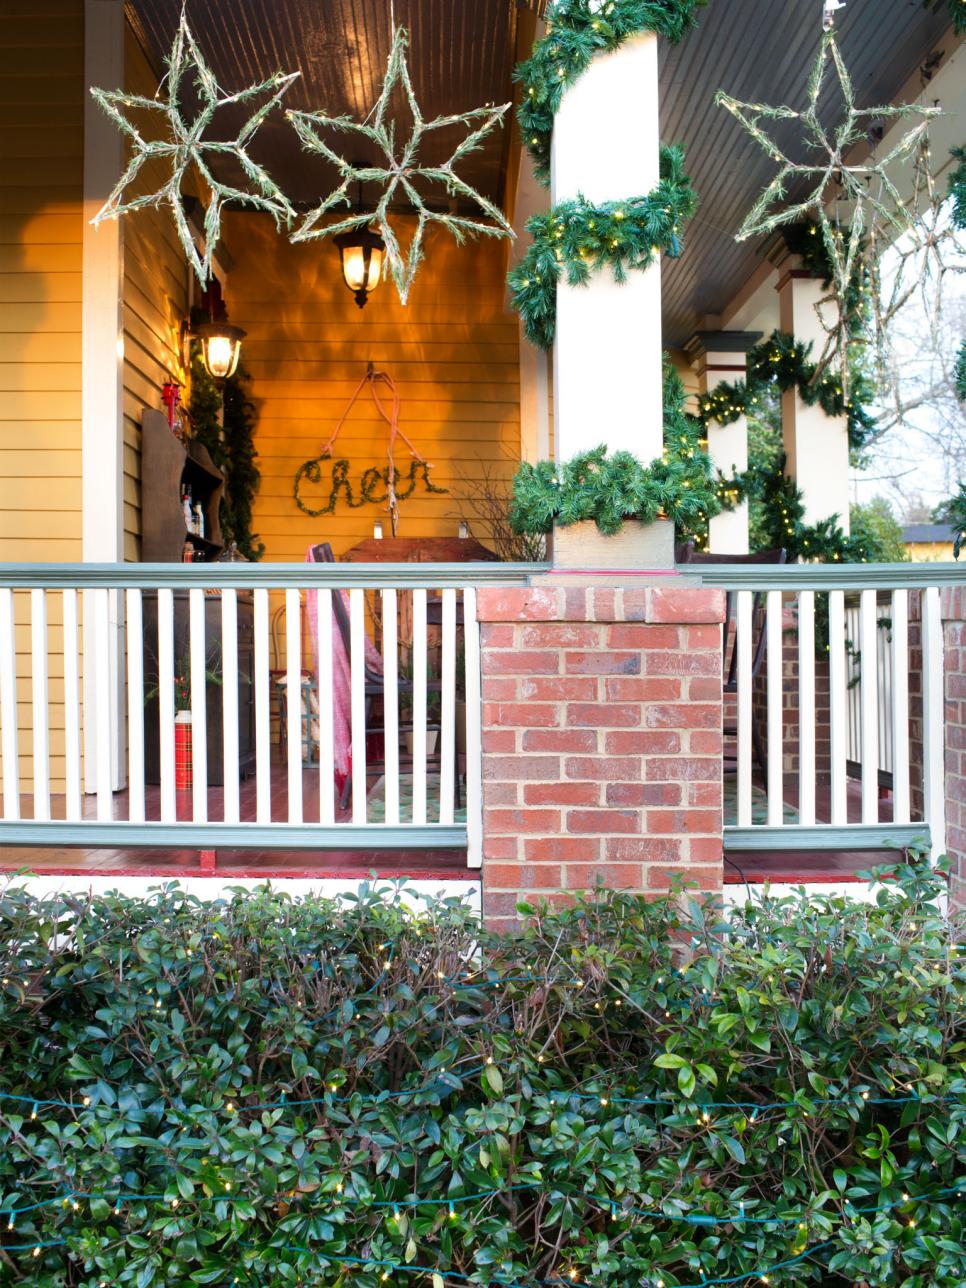 Festive Ways to Boost Your Home's Holiday Curb Appeal | HGTV